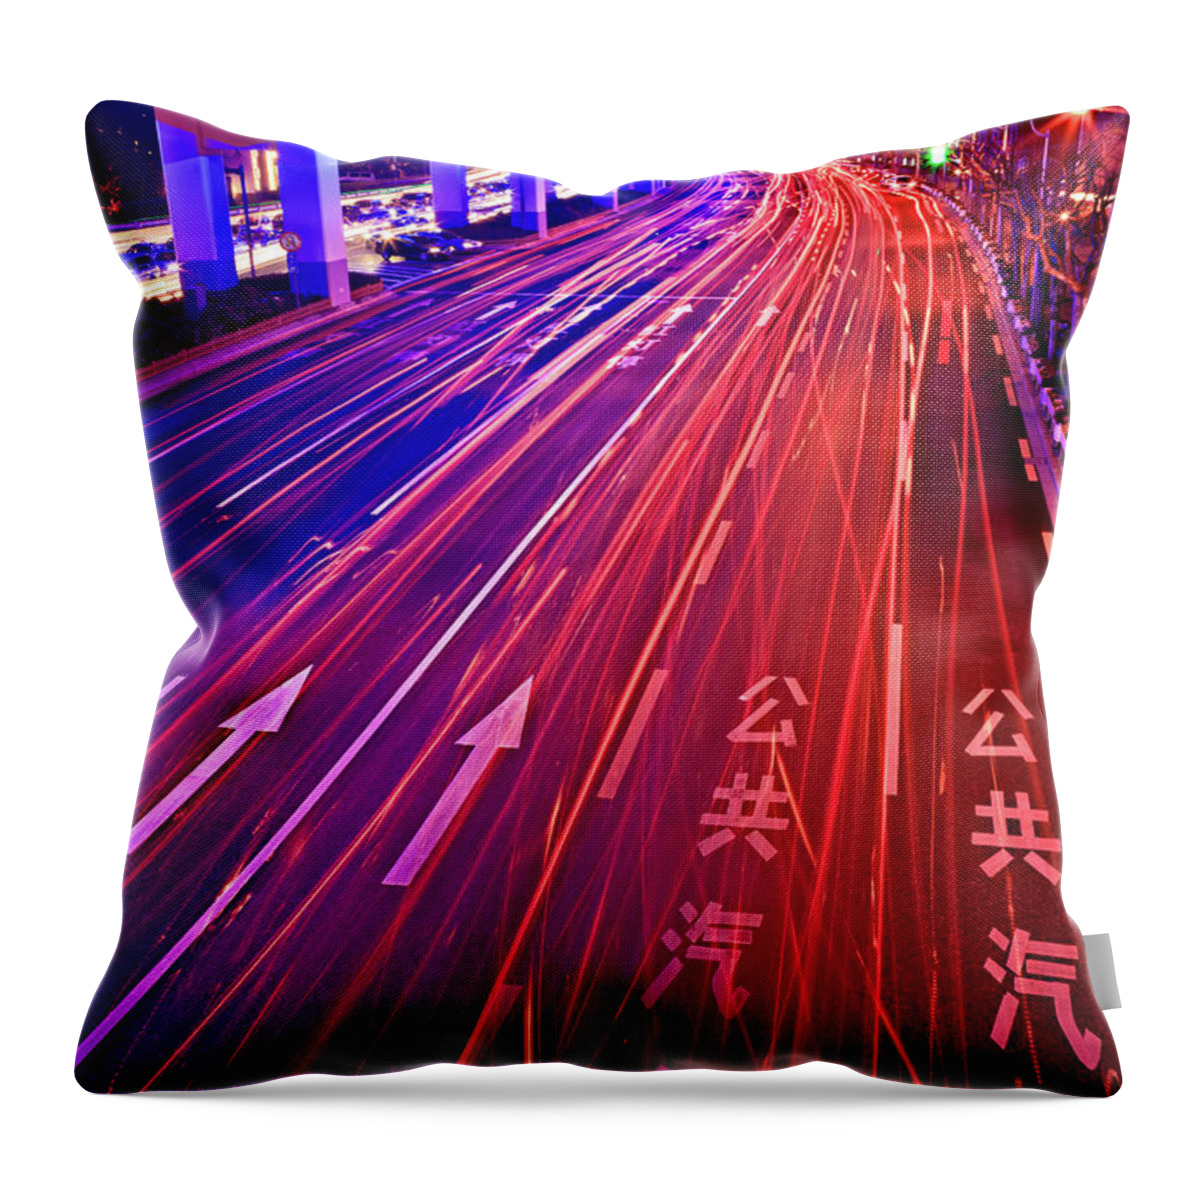 Outdoors Throw Pillow featuring the photograph Street Traffic At Night, Shanghai, China by William Yu Photography